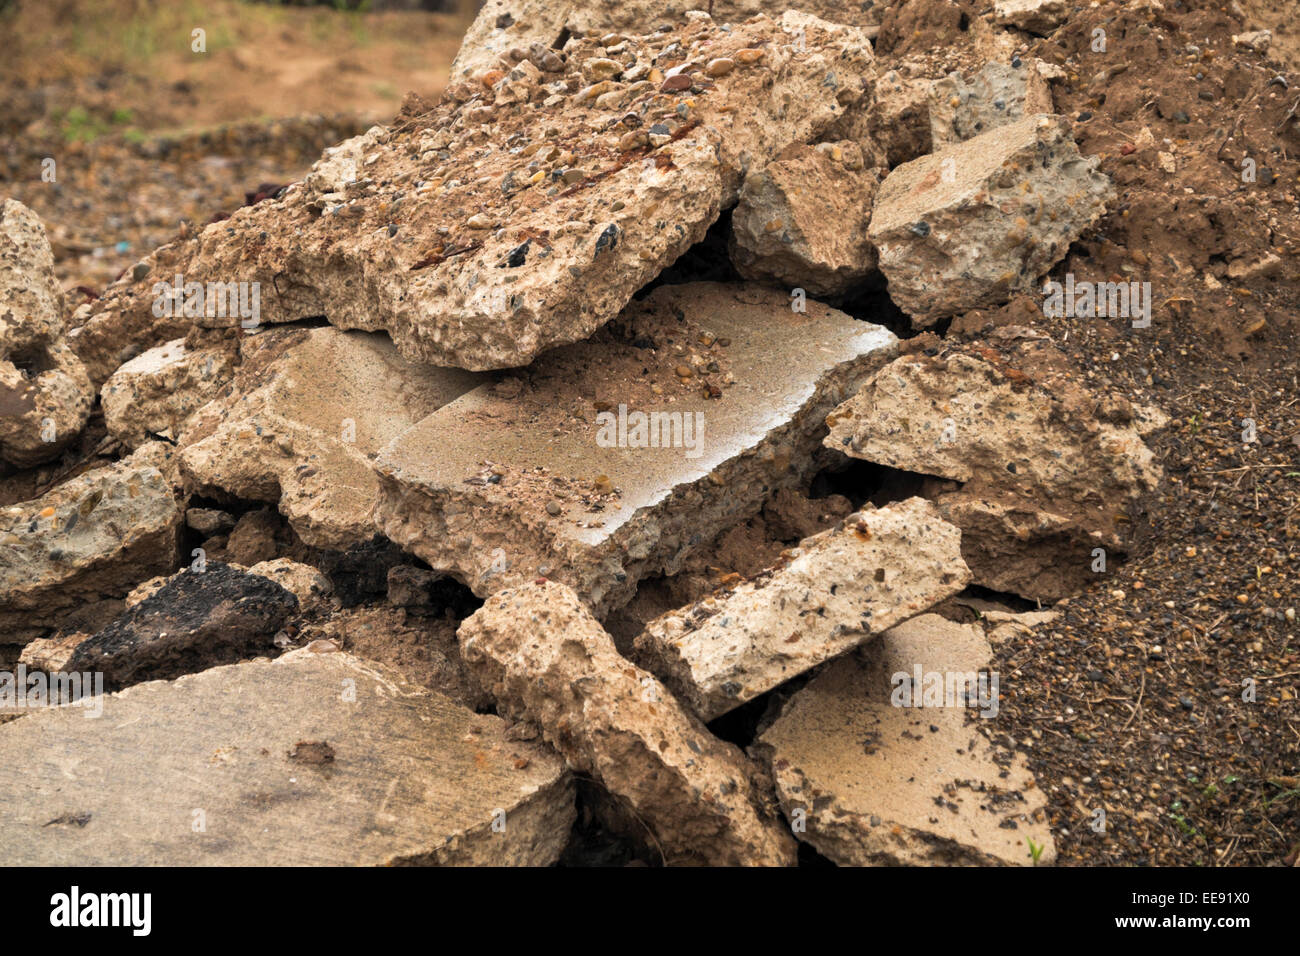 Rubble pile consisting of chunks of concrete, gravel and asphalt. Stock Photo